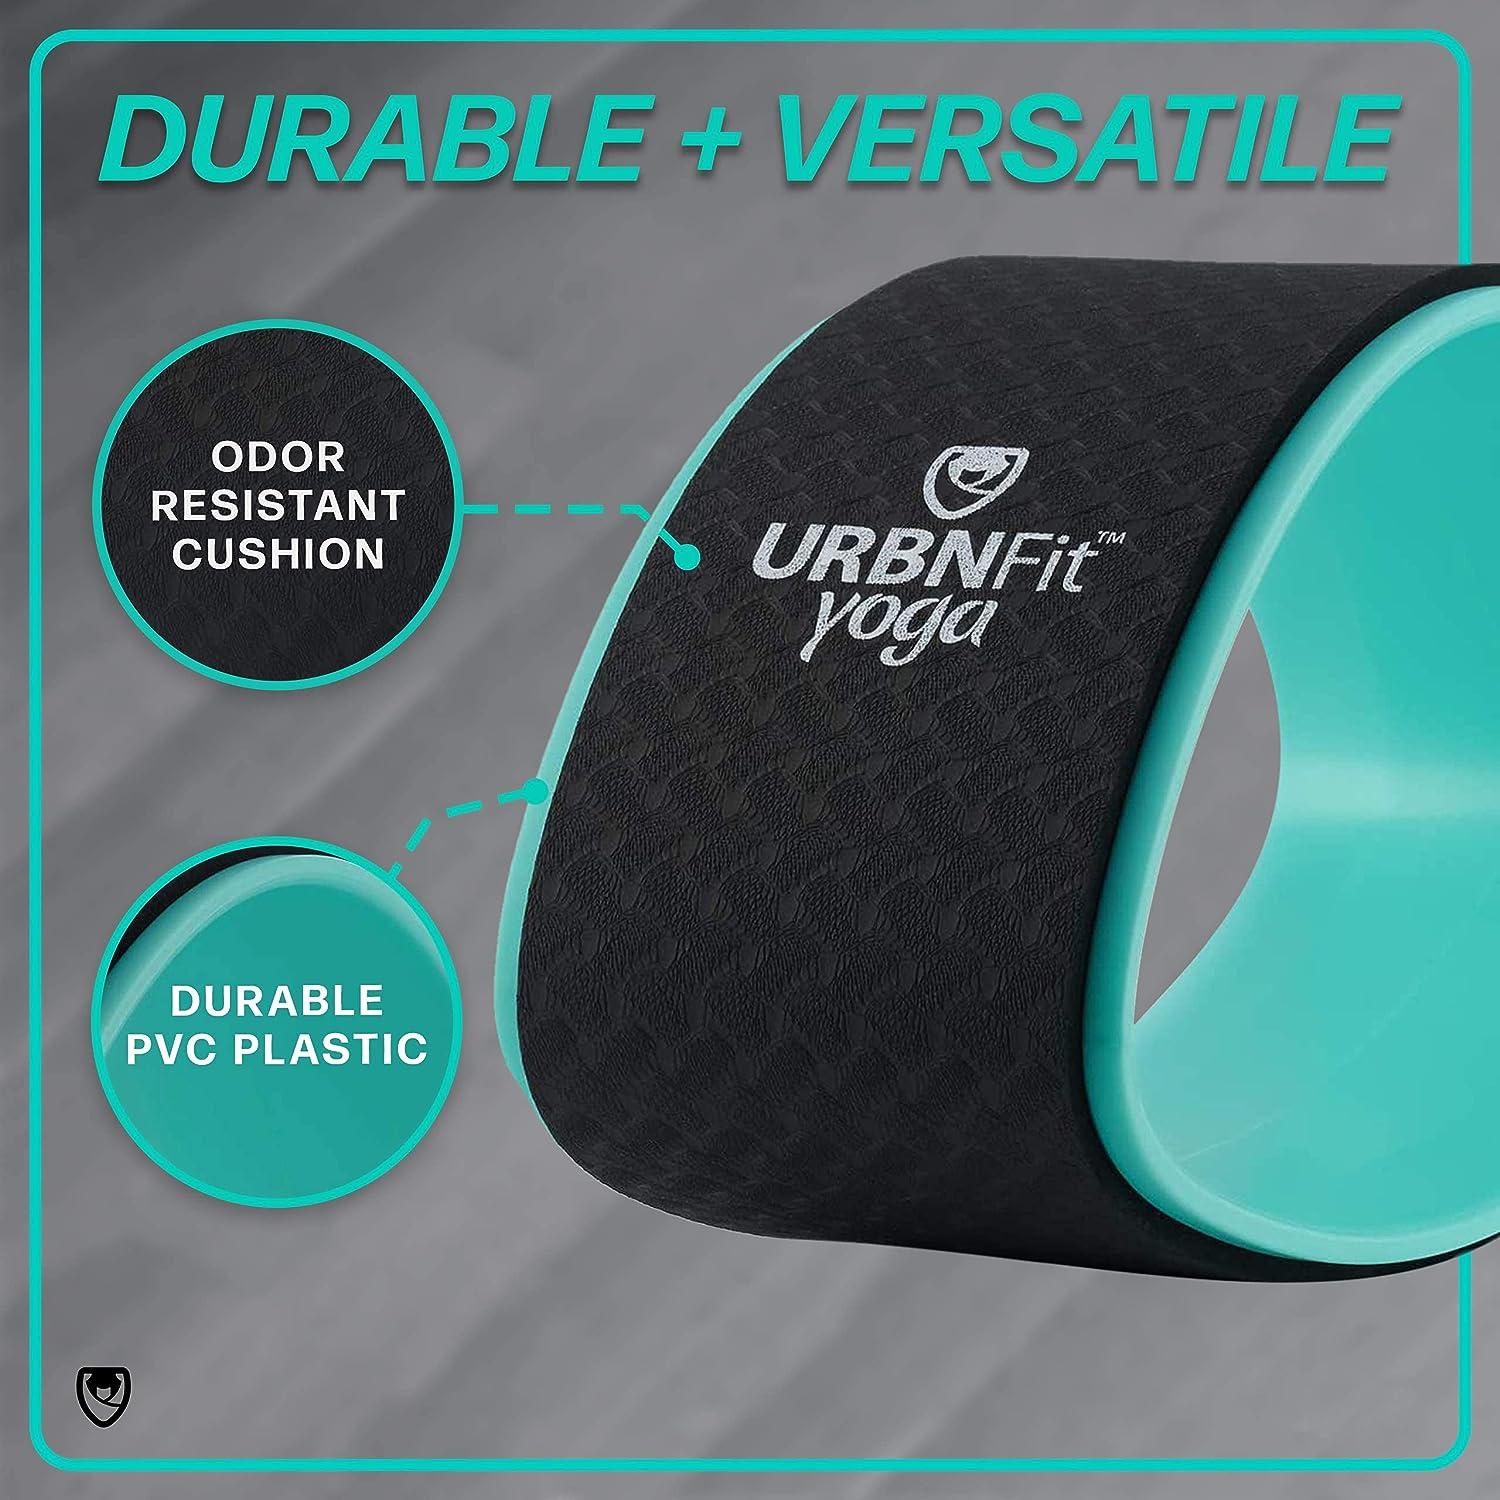 URBNFit Yoga Wheel Designed for Yoga Wheel Pose - for Stretching and  Increased Flexibility (Half)